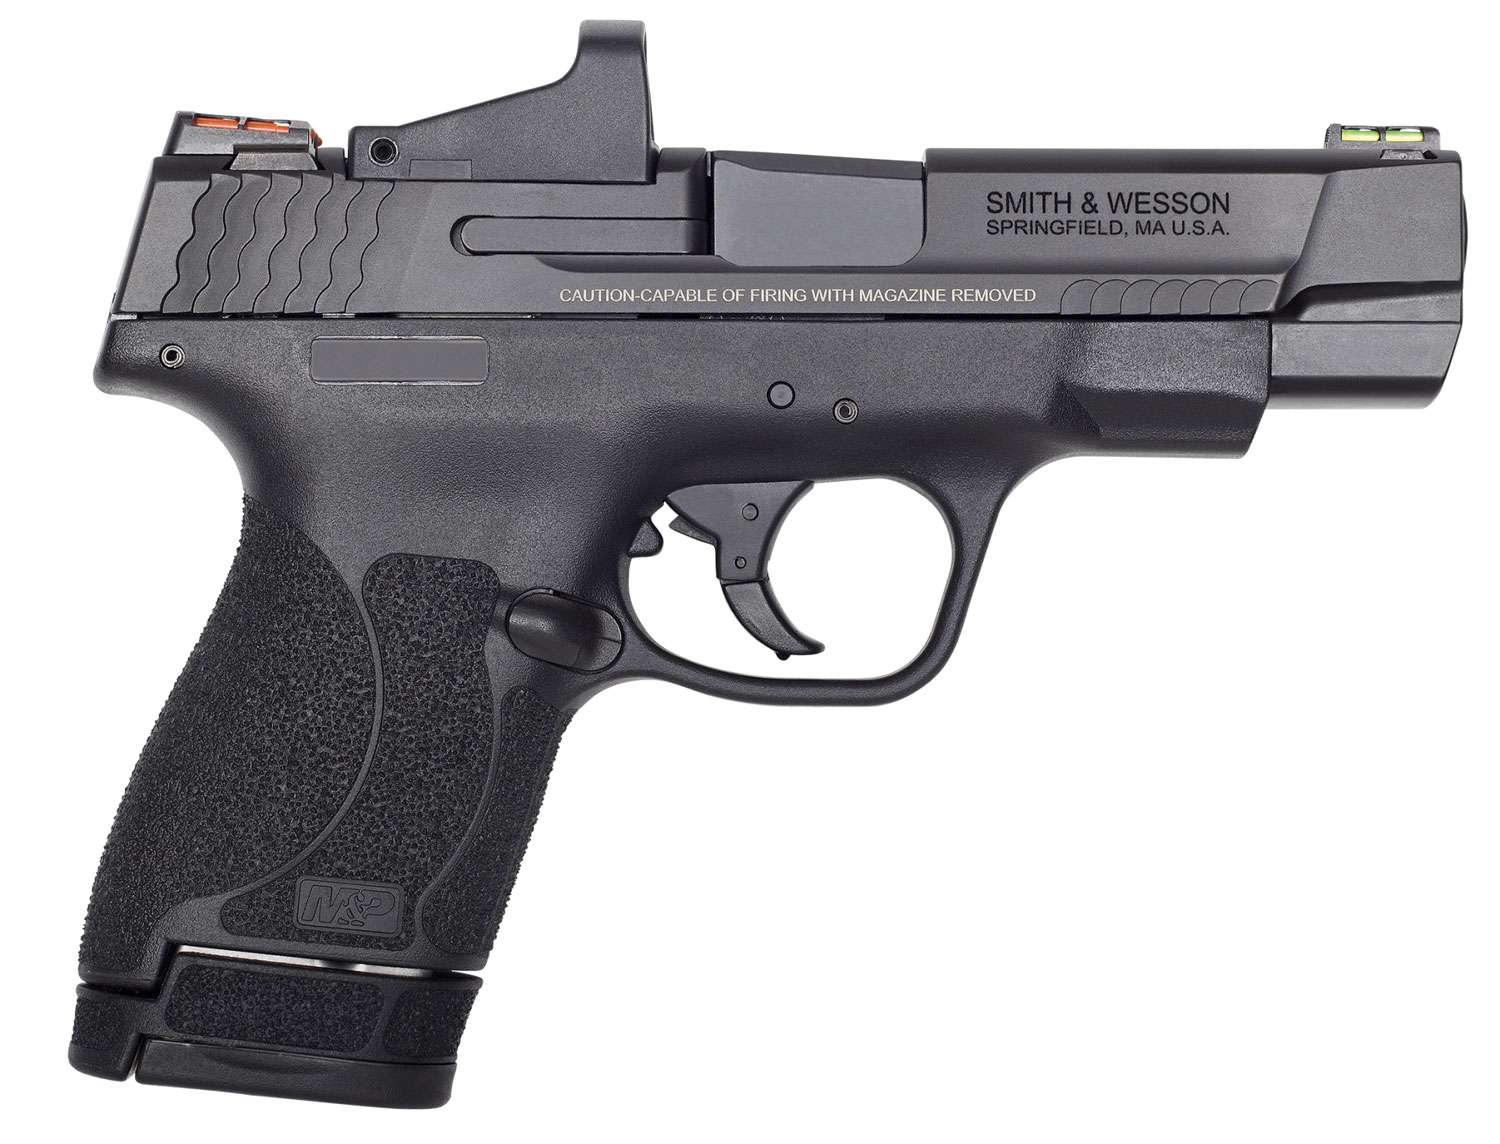 Smith & Wesson 11786 Performance Center Shield M2.0 9mm Luger 4